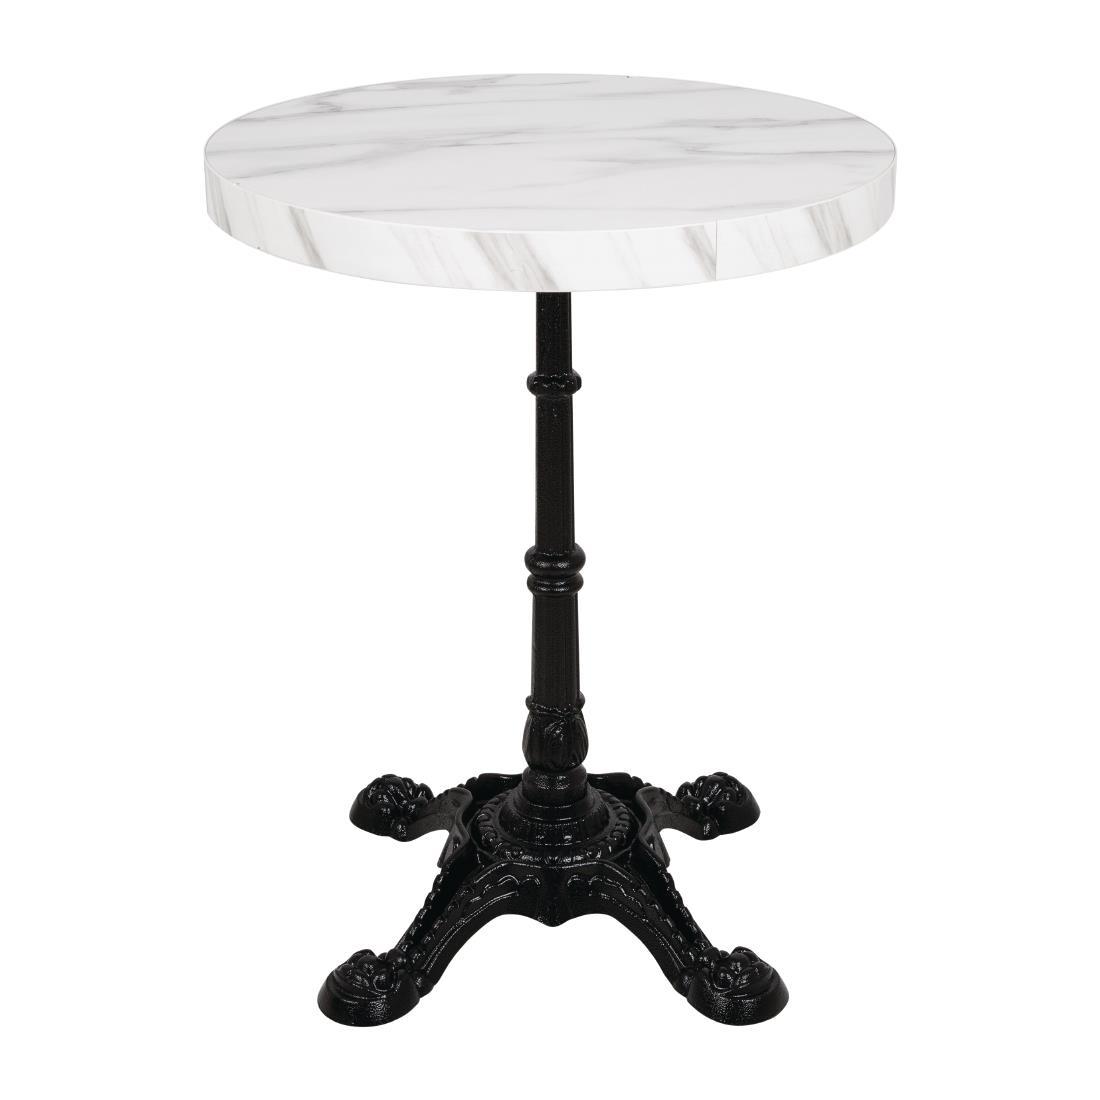 Bolero Pre-drilled Round Table Top Marble Effect 600mm - DT445  - 2